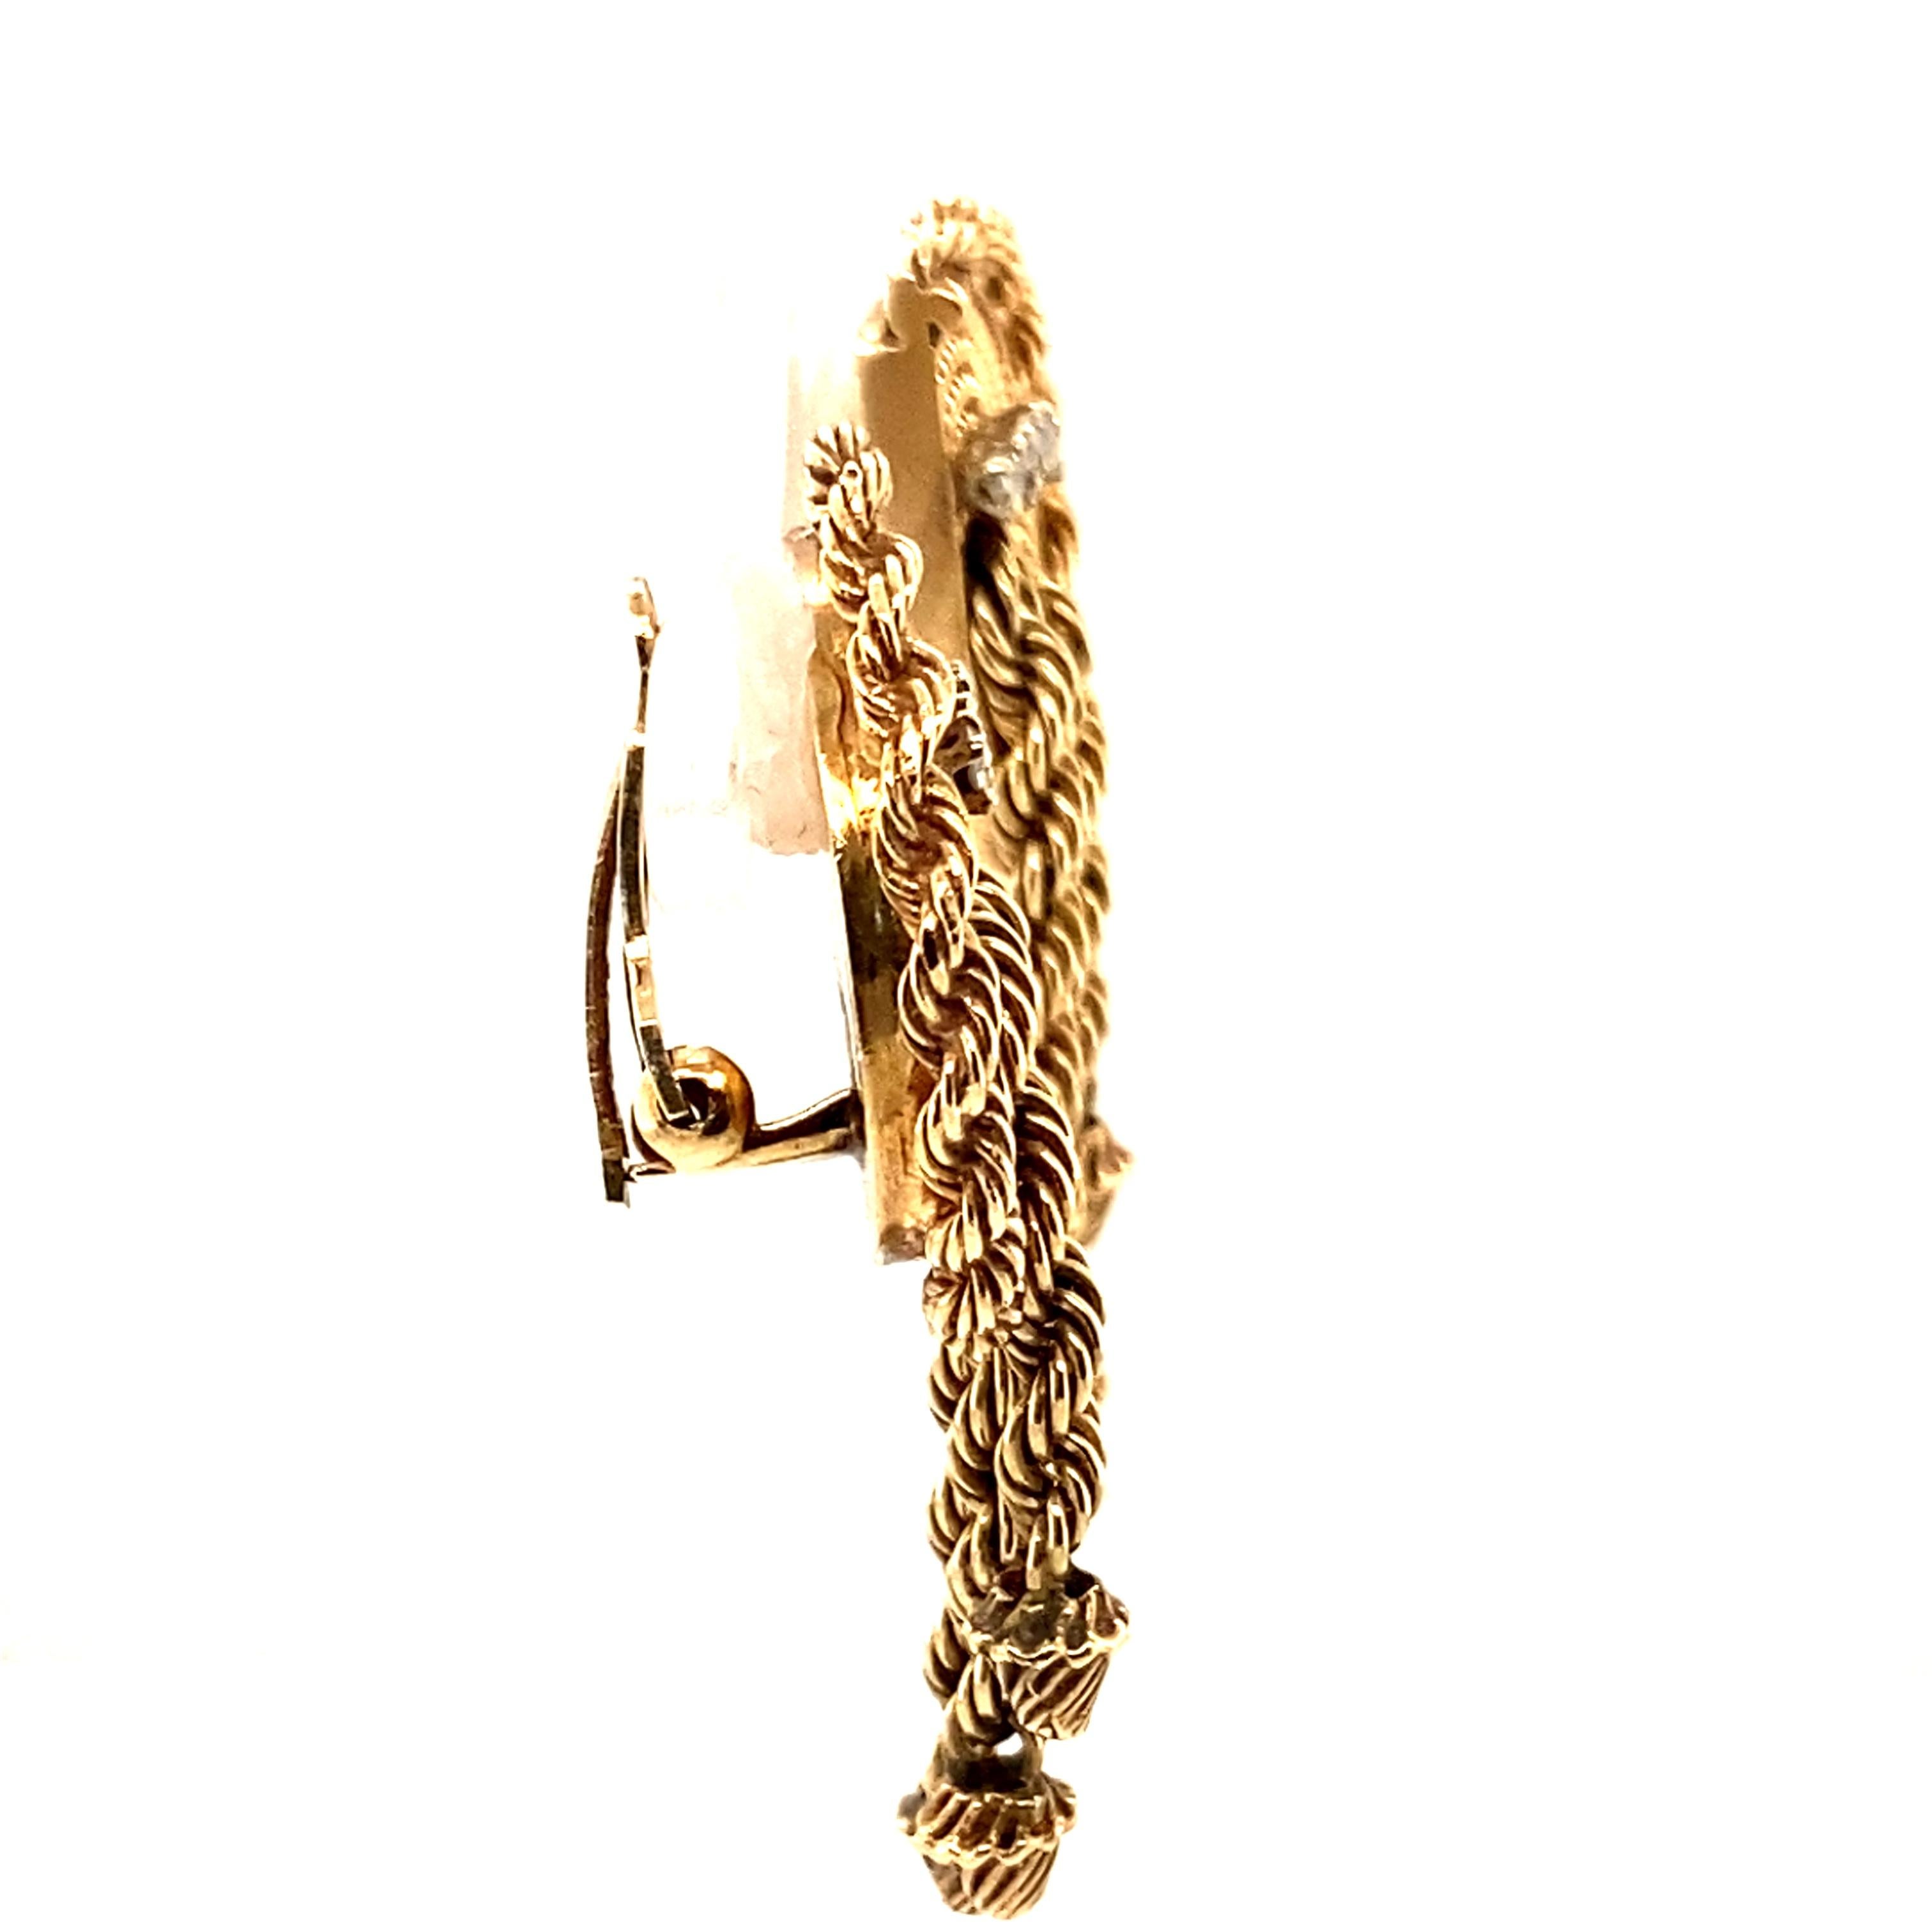 Item Details:
Type: 14 Karat Yellow Gold
Weight: 19.4 grams
Measurements: 2 inches length x 1 inch width 

Diamond Details: 
Cut: Round 
Carat: .24 Carat Total 
Cut: I-J
Clarity: SI

Item Features:
Circa 1940s featuring 3 tassels twisted rope